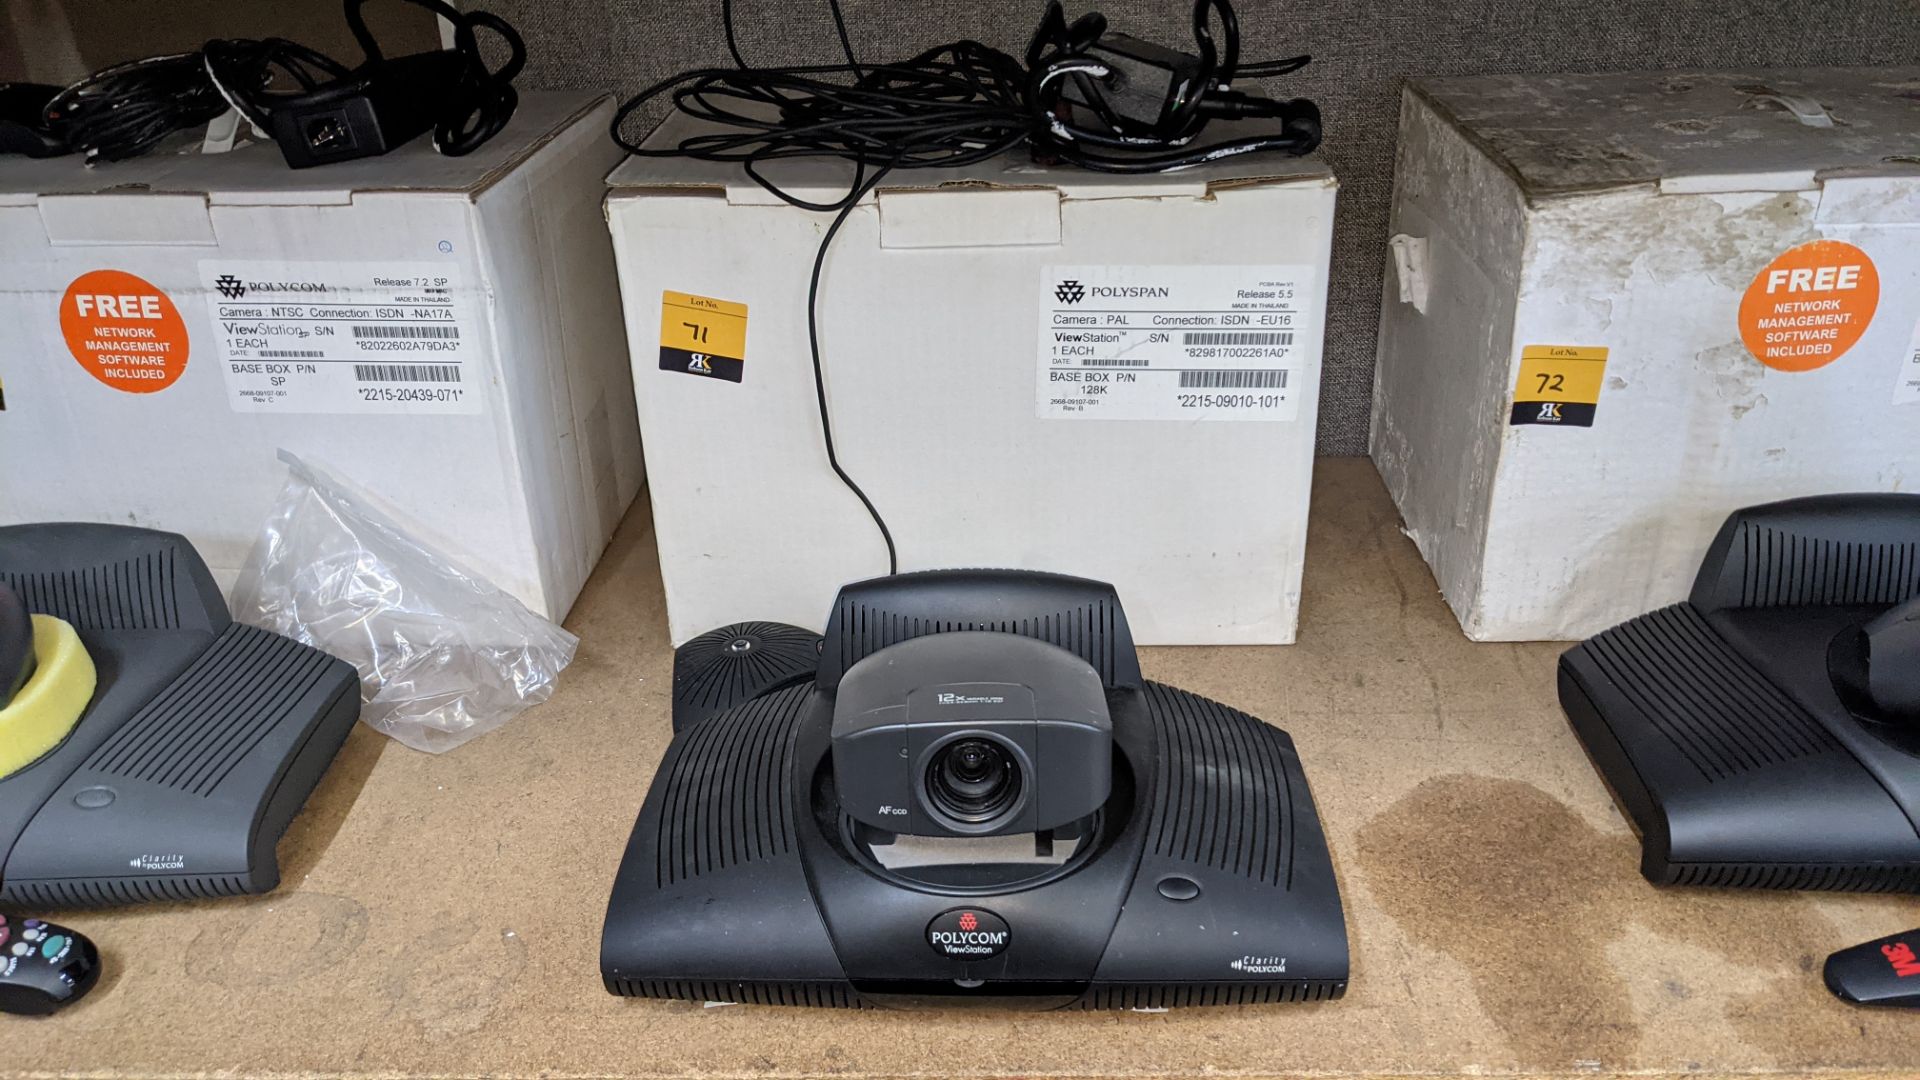 Polycom ViewStation video conferencing system, part number 2201-08666-001. NB no remote